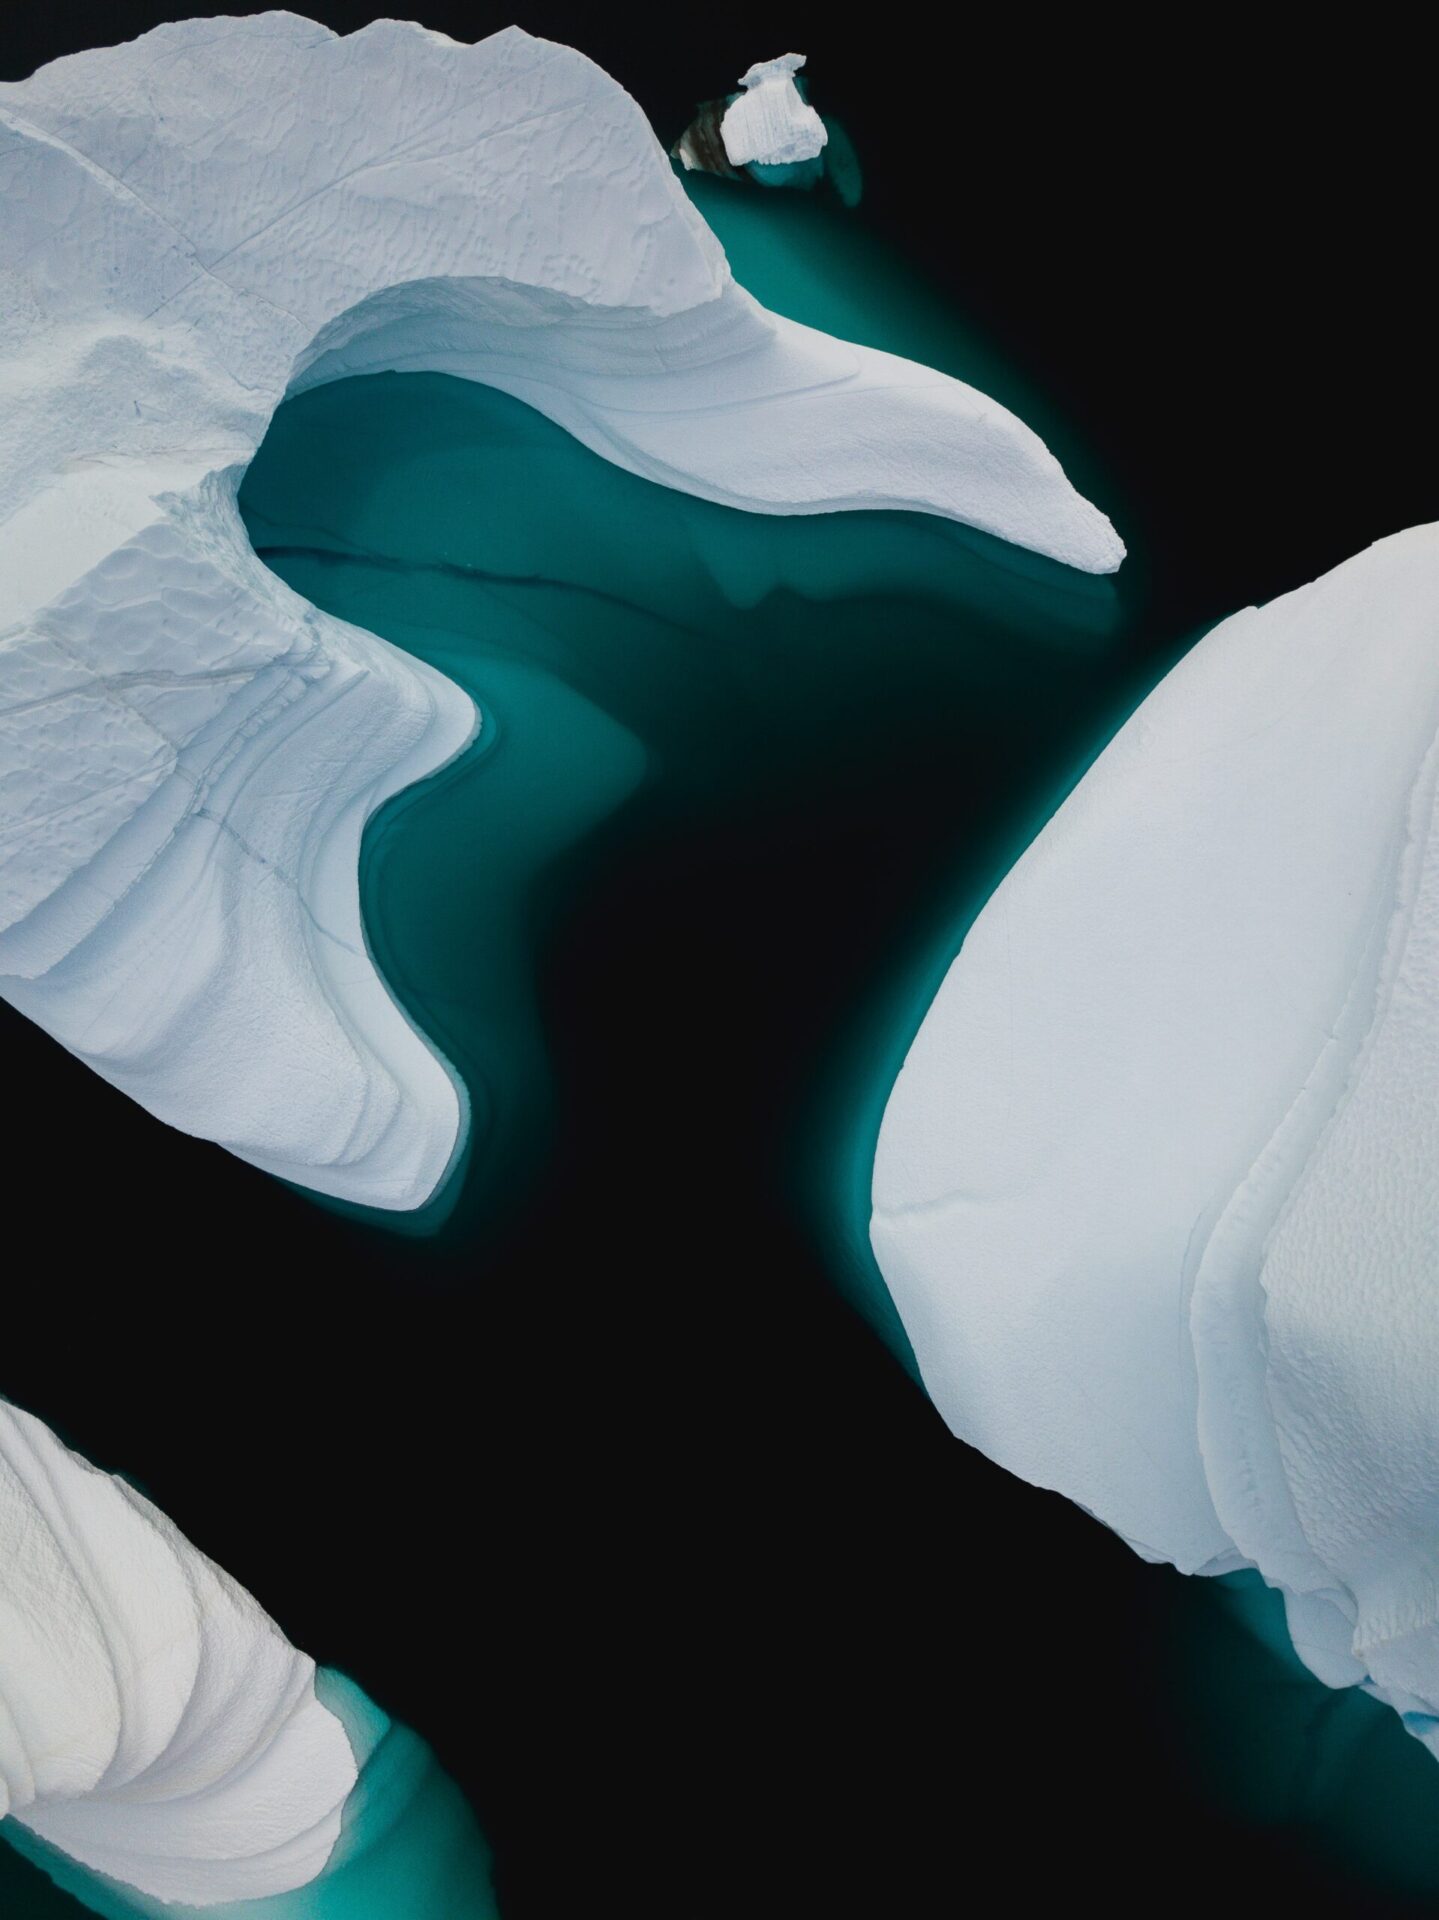 A view of icebergs from above